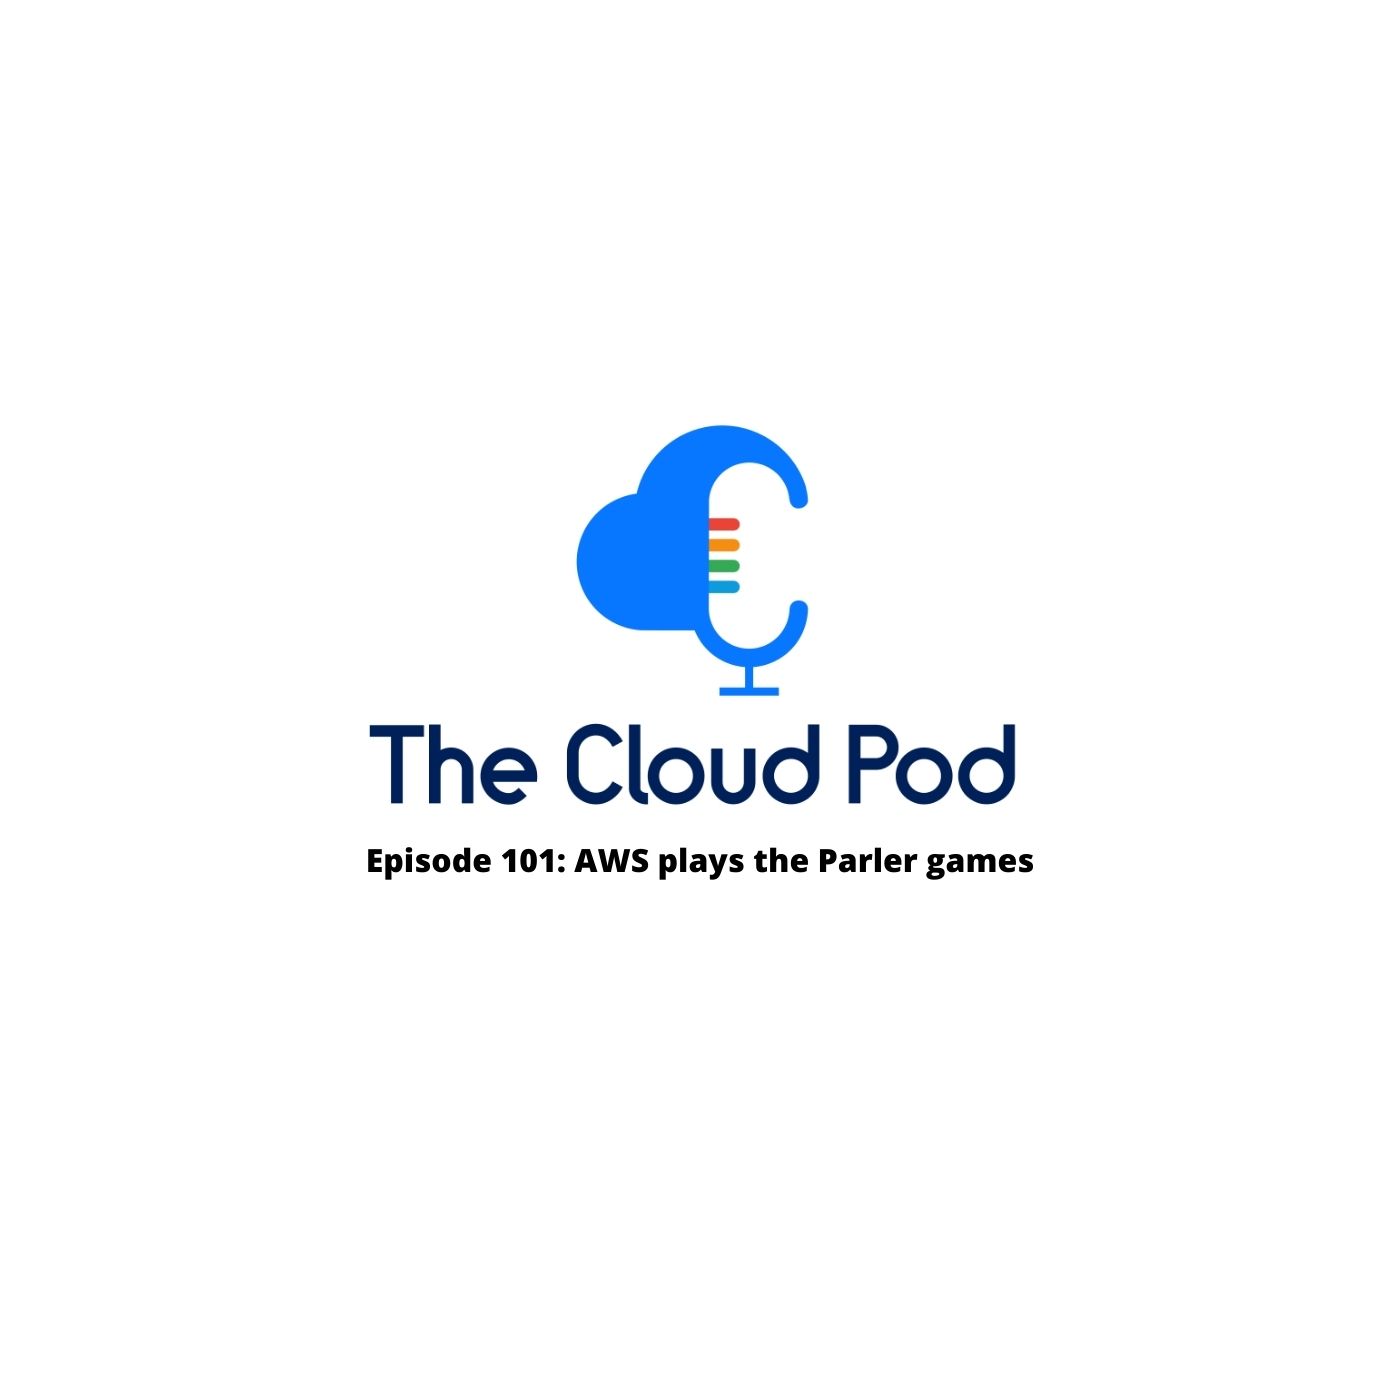 Episode 101: AWS plays the Parler games